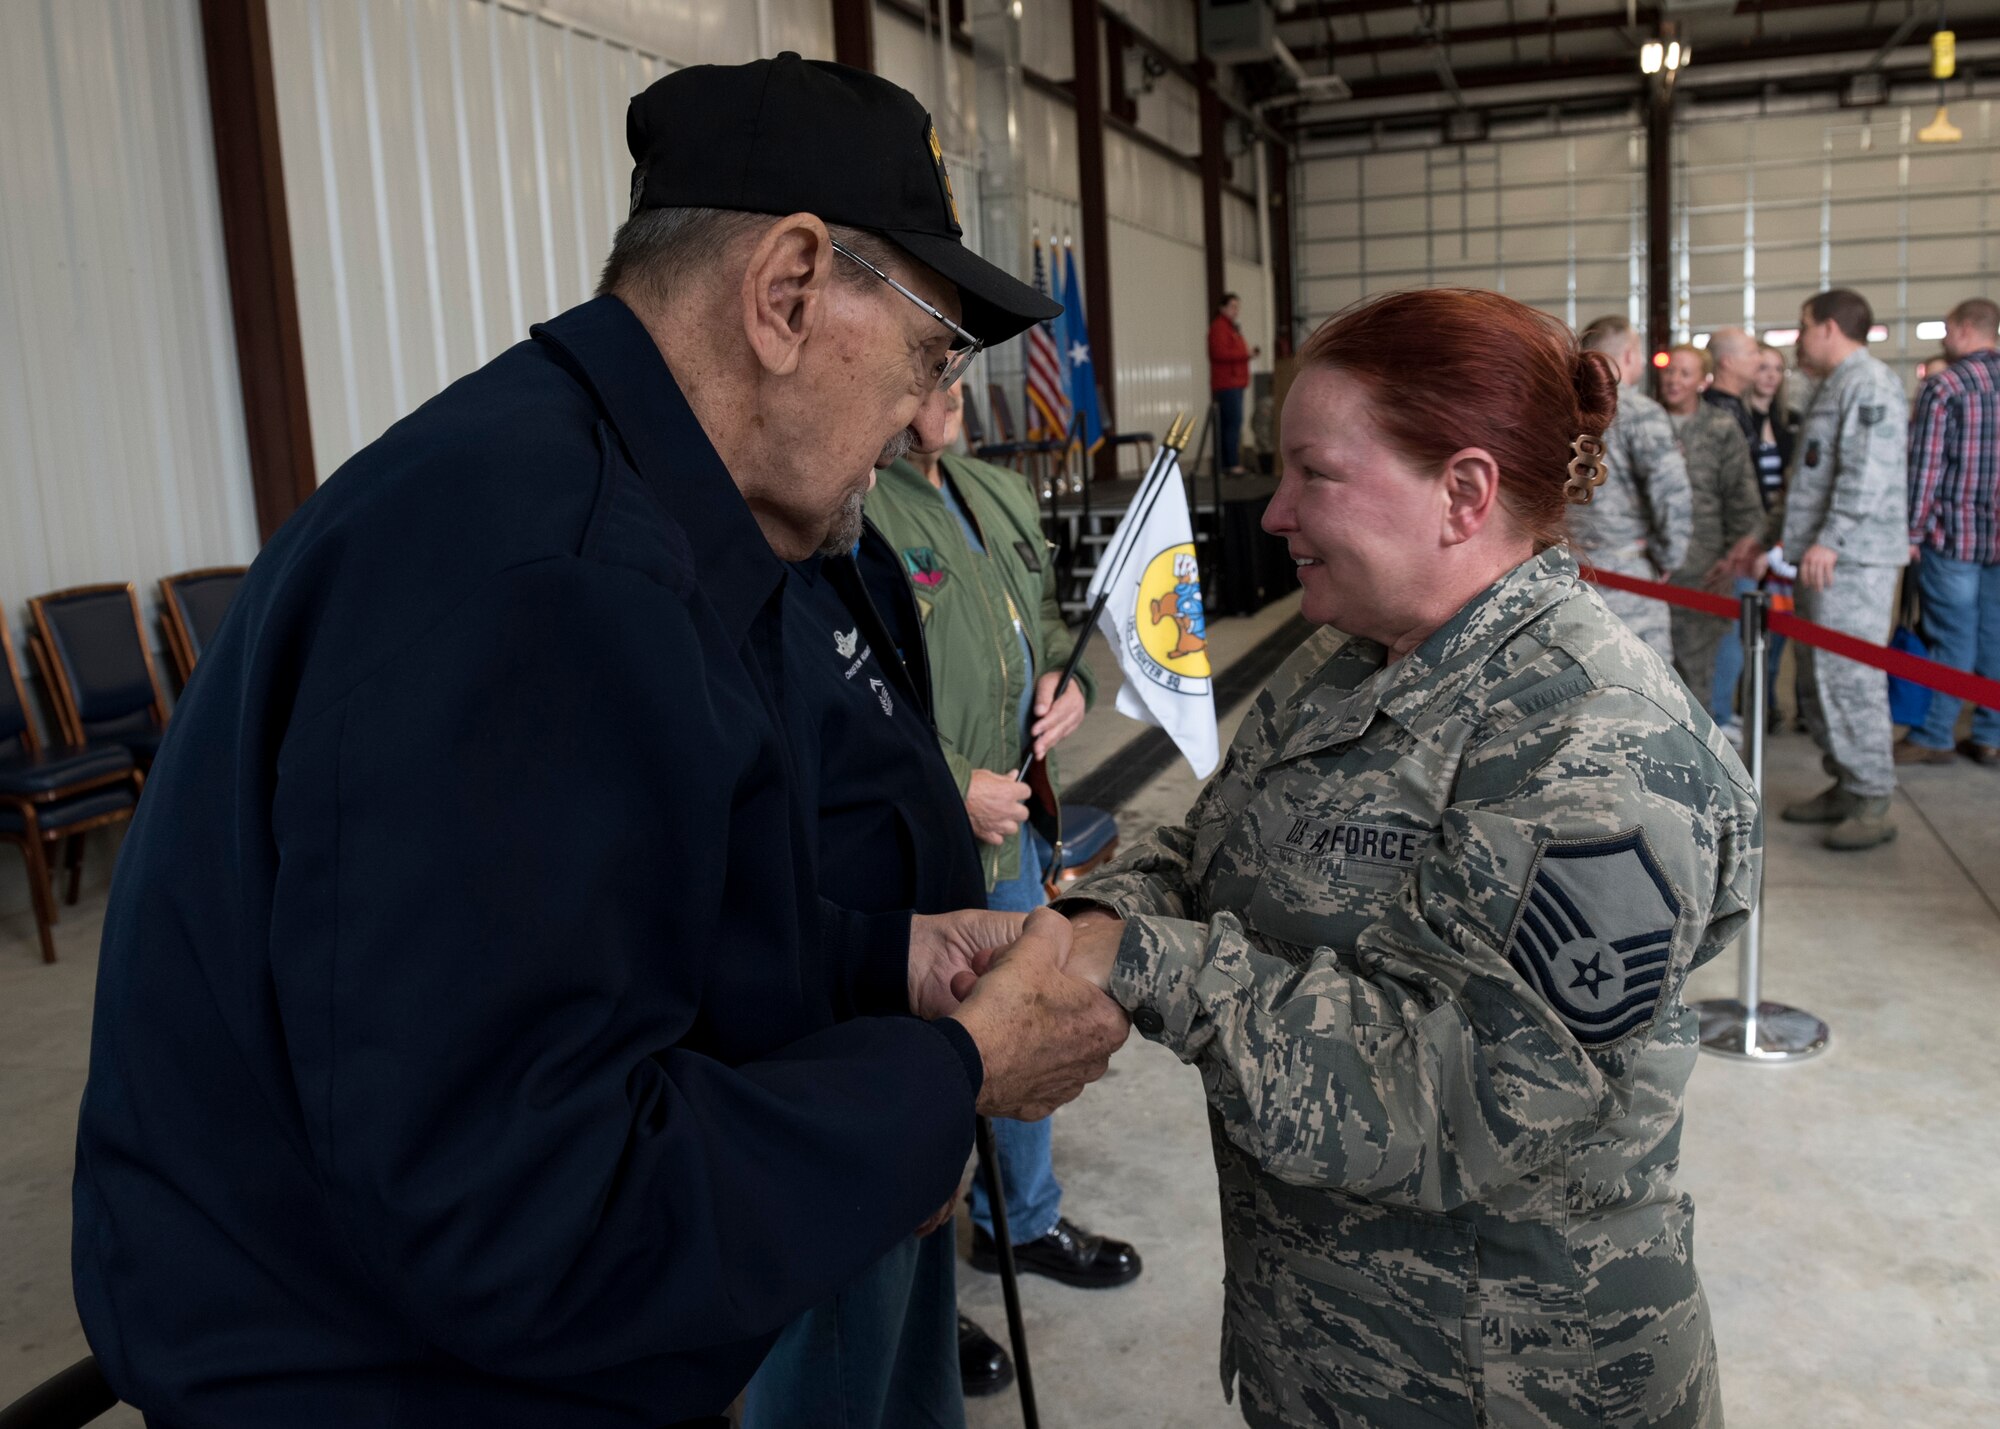 Retired Command Chief Master Sergeant George Banasky, (left) speaks with Master Sgt. Darlene Kirk during a homecoming ceremony at the 138th Fighter Wing in Tulsa, Okla., March 5, 2017. Members of the Silver Beavers and Blue Star Mothers attended this event to show their support of the Airmen who deployed and to welcome them home. (U.S. Air National Guard photo by Senior Airman Rebecca Imwalle)